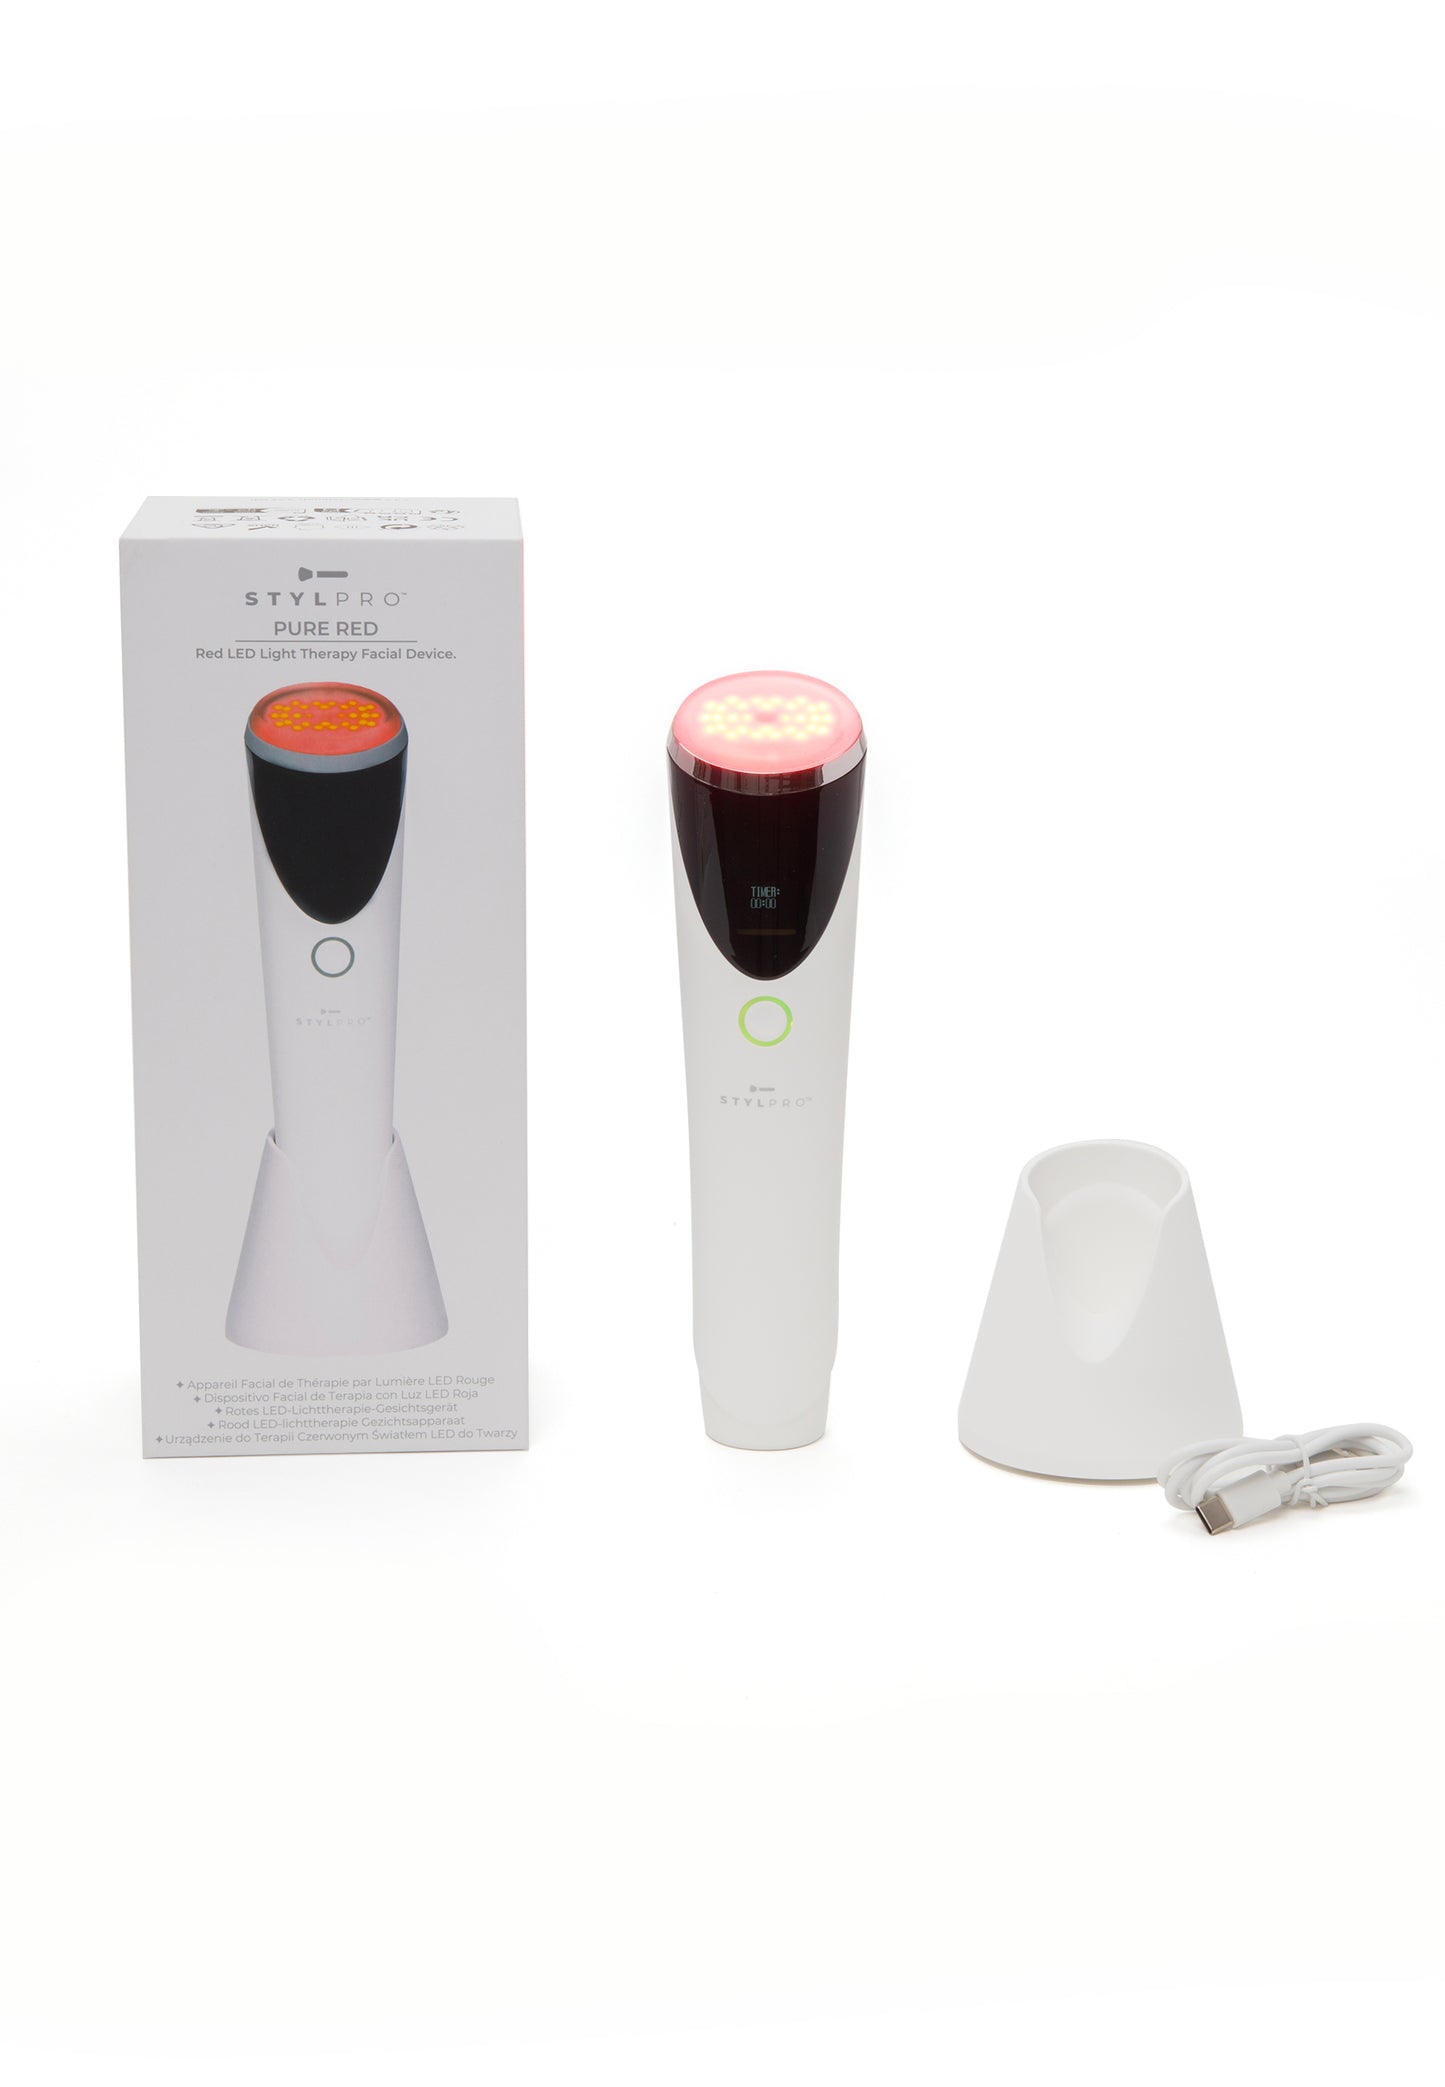 Red & Infa Red Light Therapy Facial Device